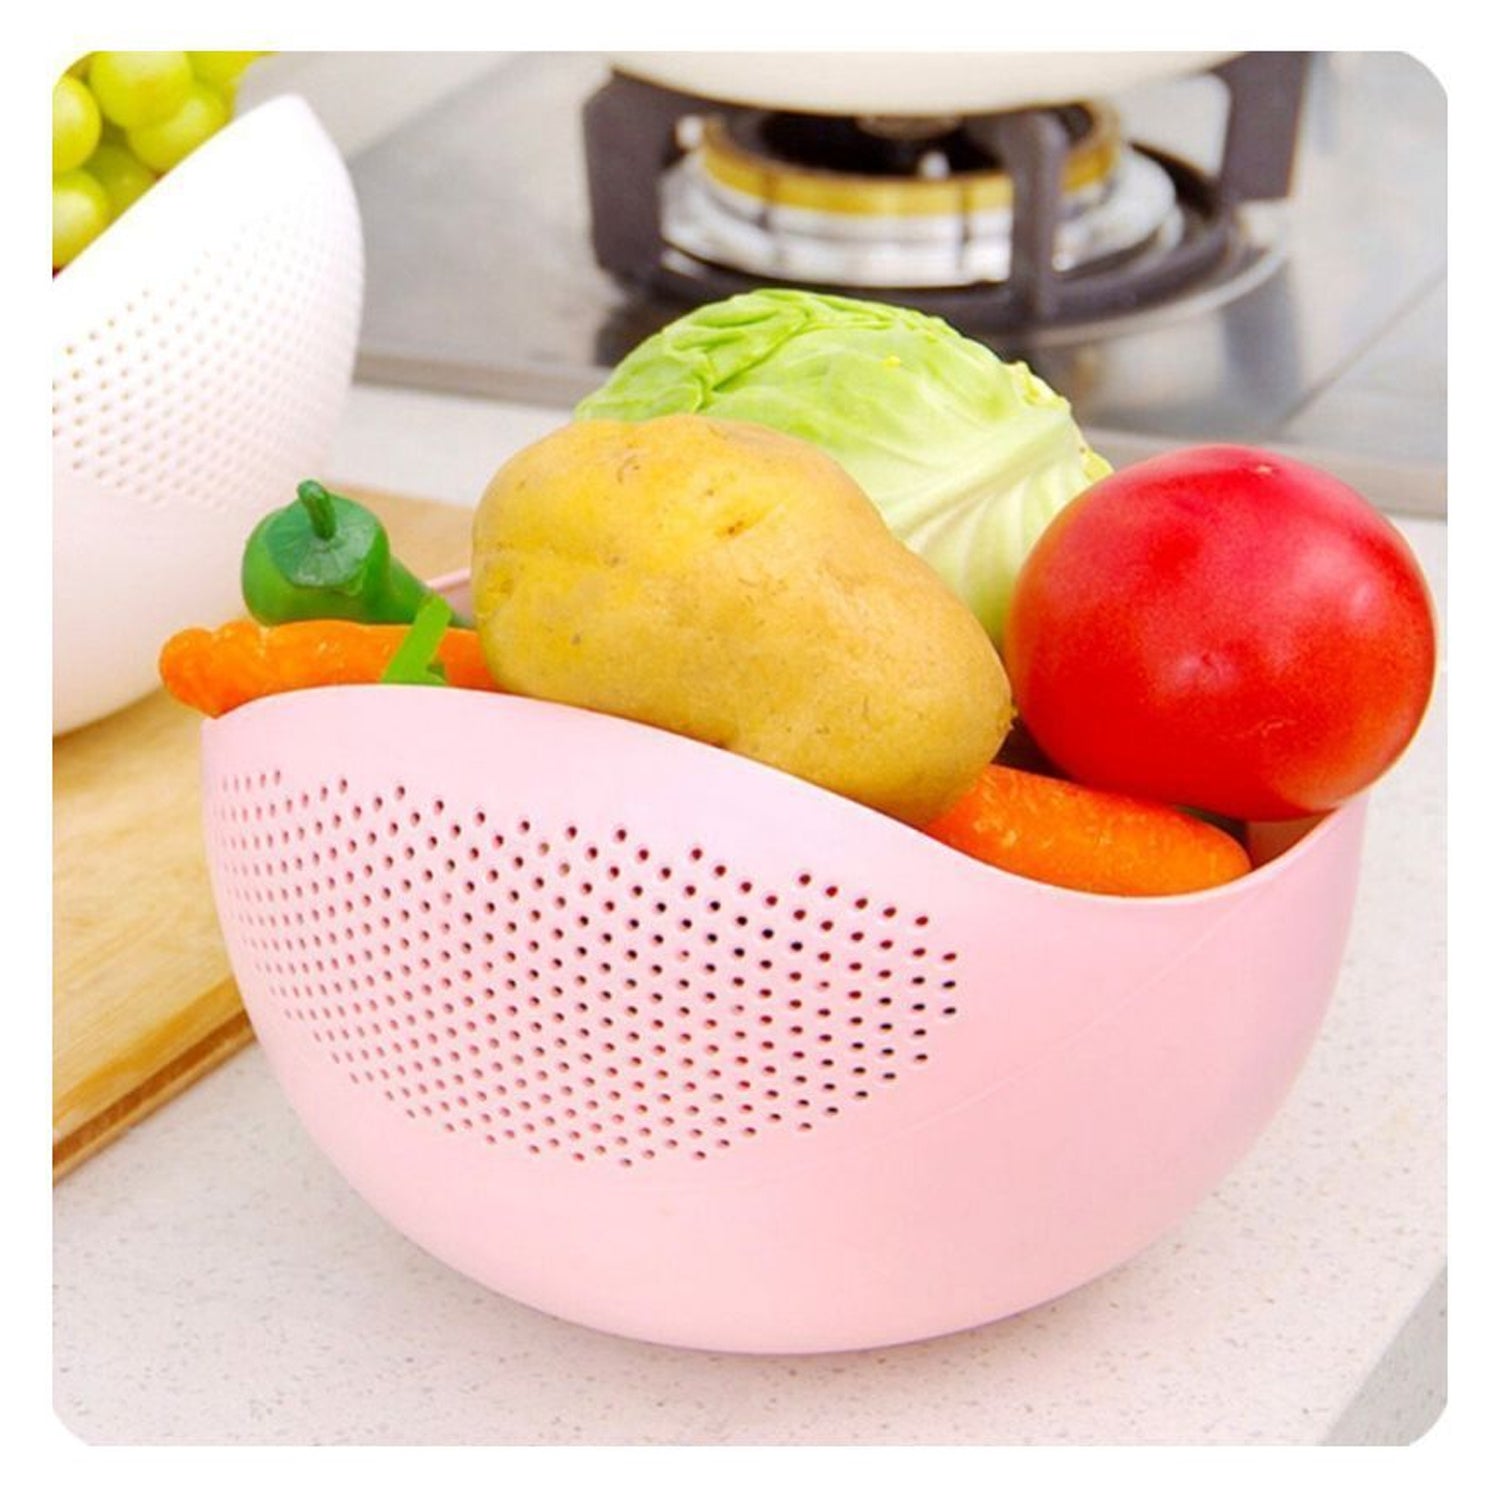 2015 Plastic Rice Bowl/Food Strainer Thick Drain Basket with Handle for Rice, Vegetable & Fruit (set of 3pcs With Brown box) DeoDap